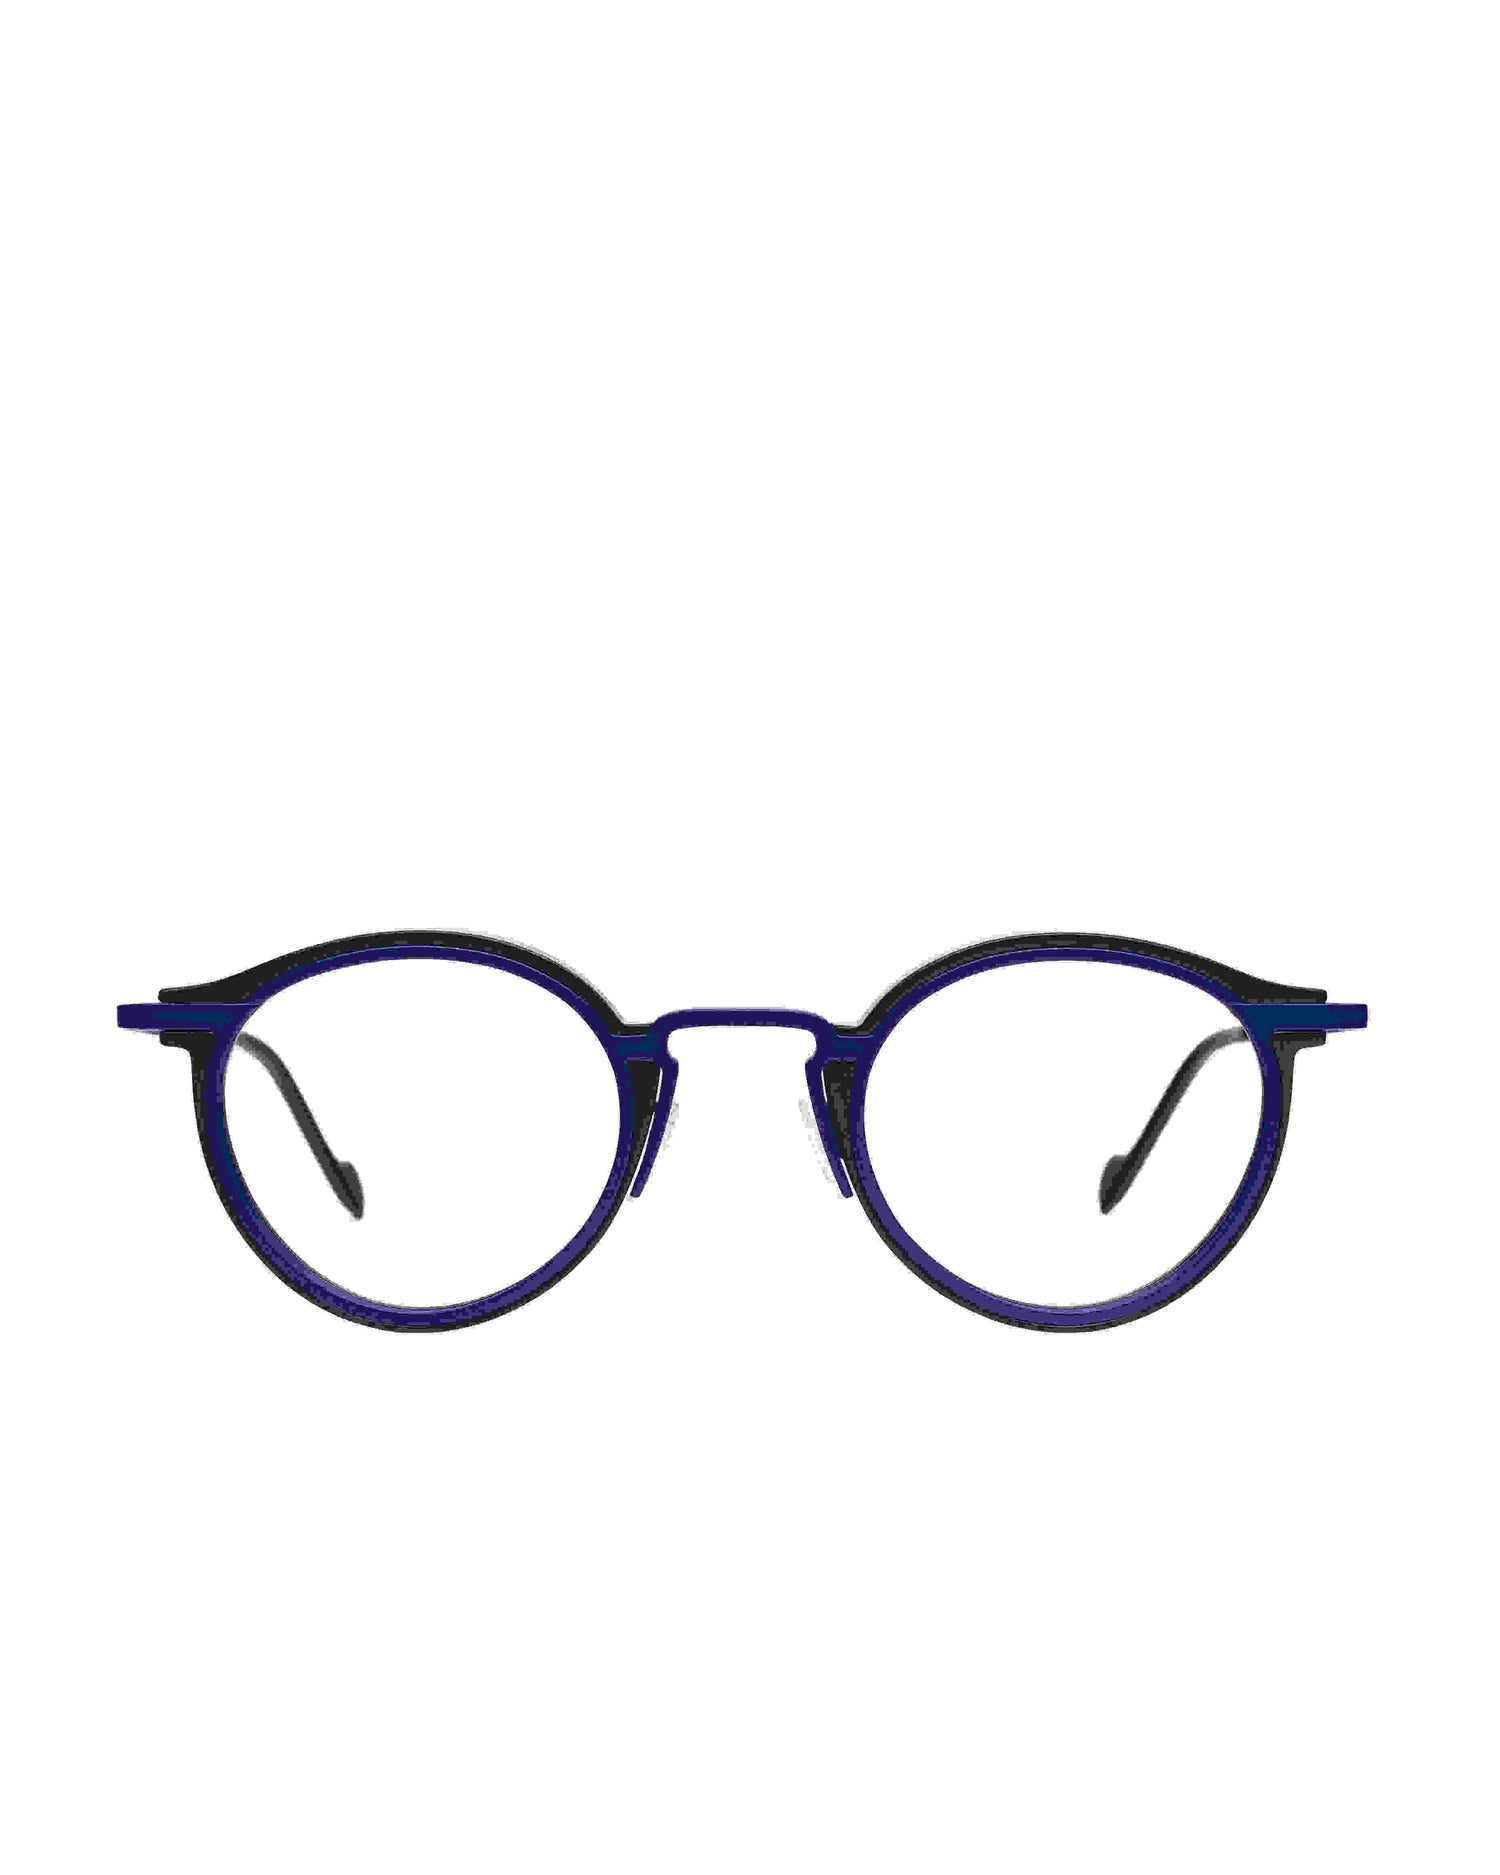 Anne and Valentin - M5 - 21A21 | glasses bar:  Marie-Sophie Dion